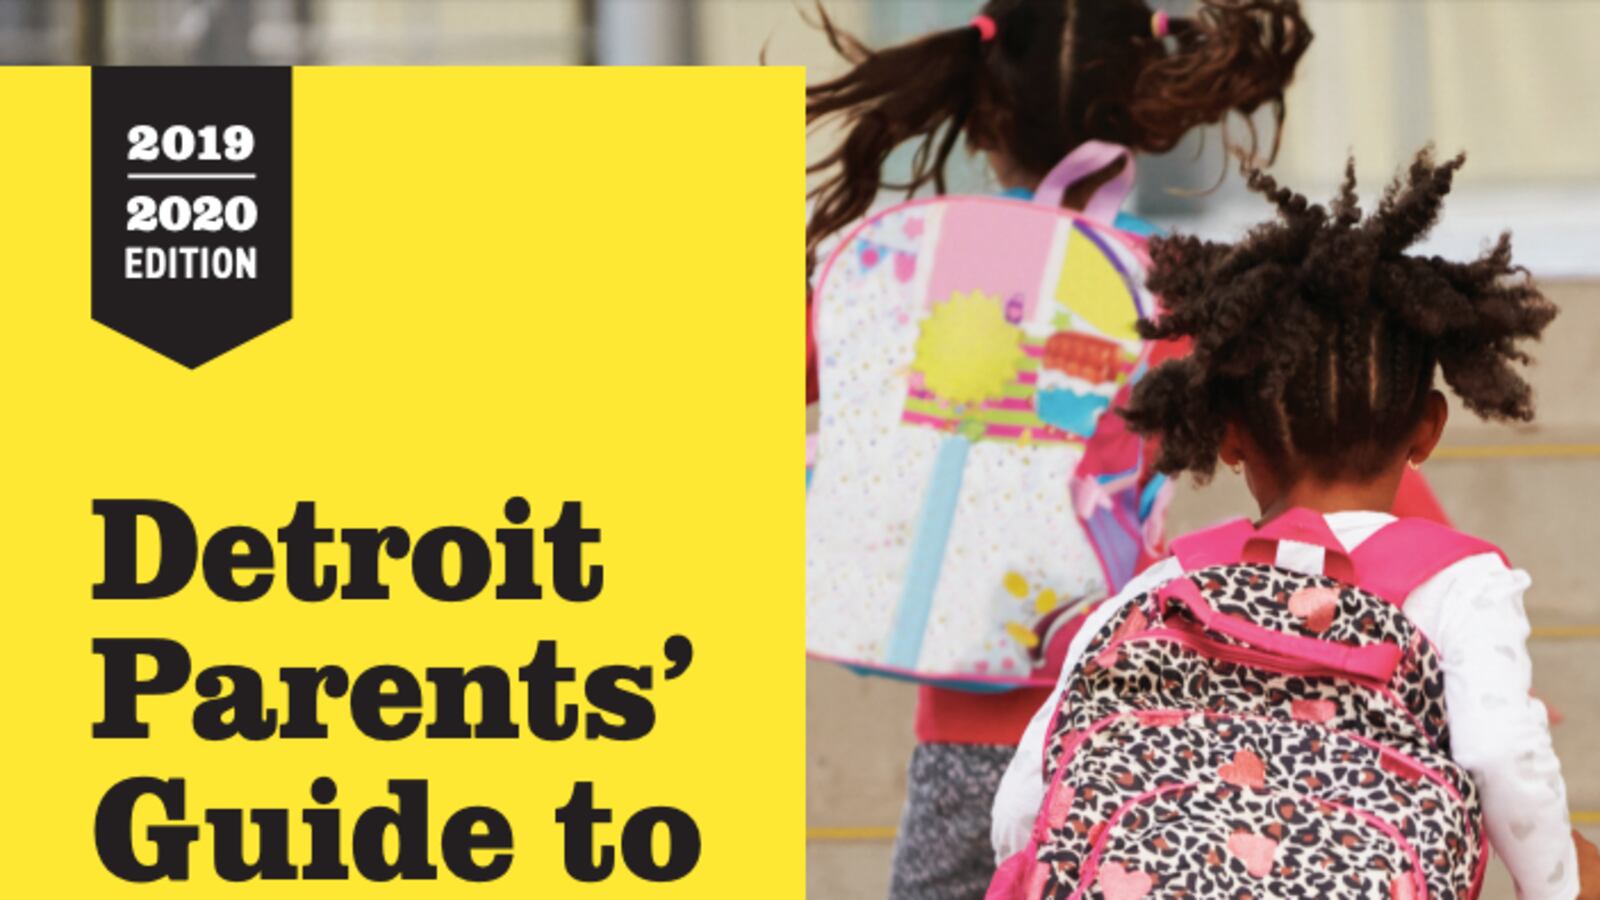 A snapshot from the cover of the second edition of a school guide published by the Detroit Community Education Commission.